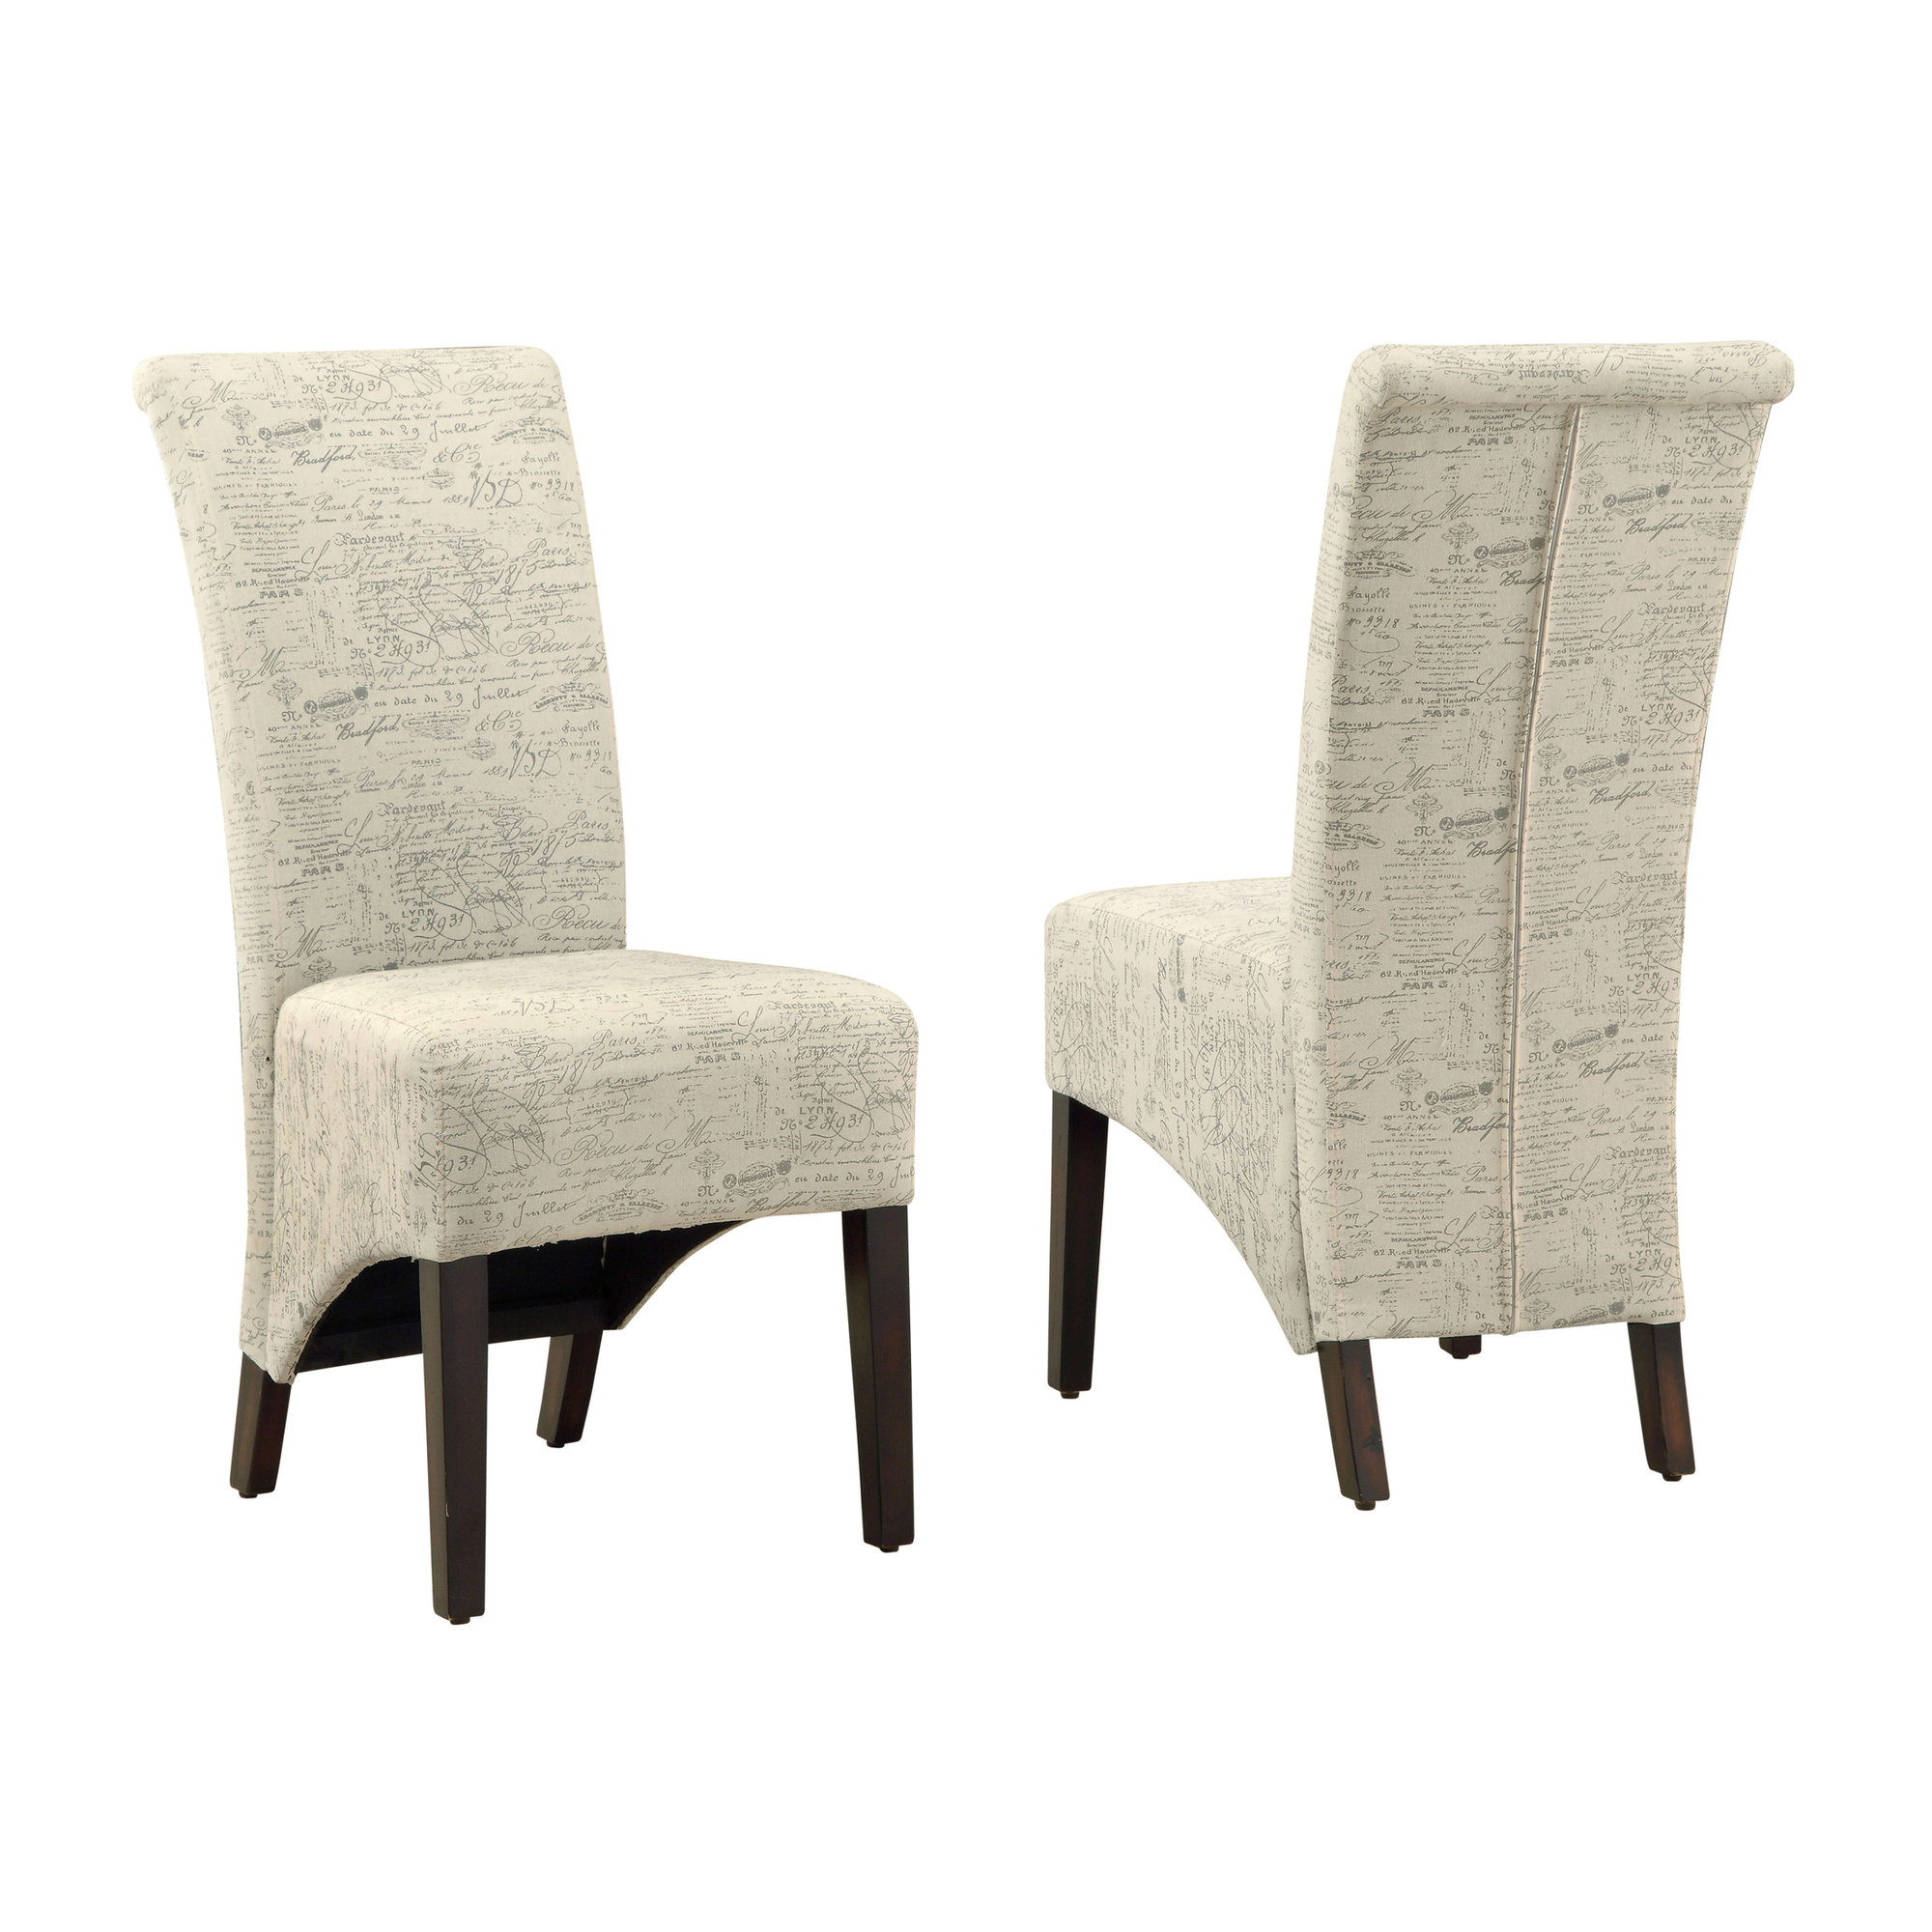 Monarch Specialties Dining Chair, Set Of 2, Side, Upholstered, Kitchen, Dining Room, Fabric, Wood Legs, Beige, Black, Transitional